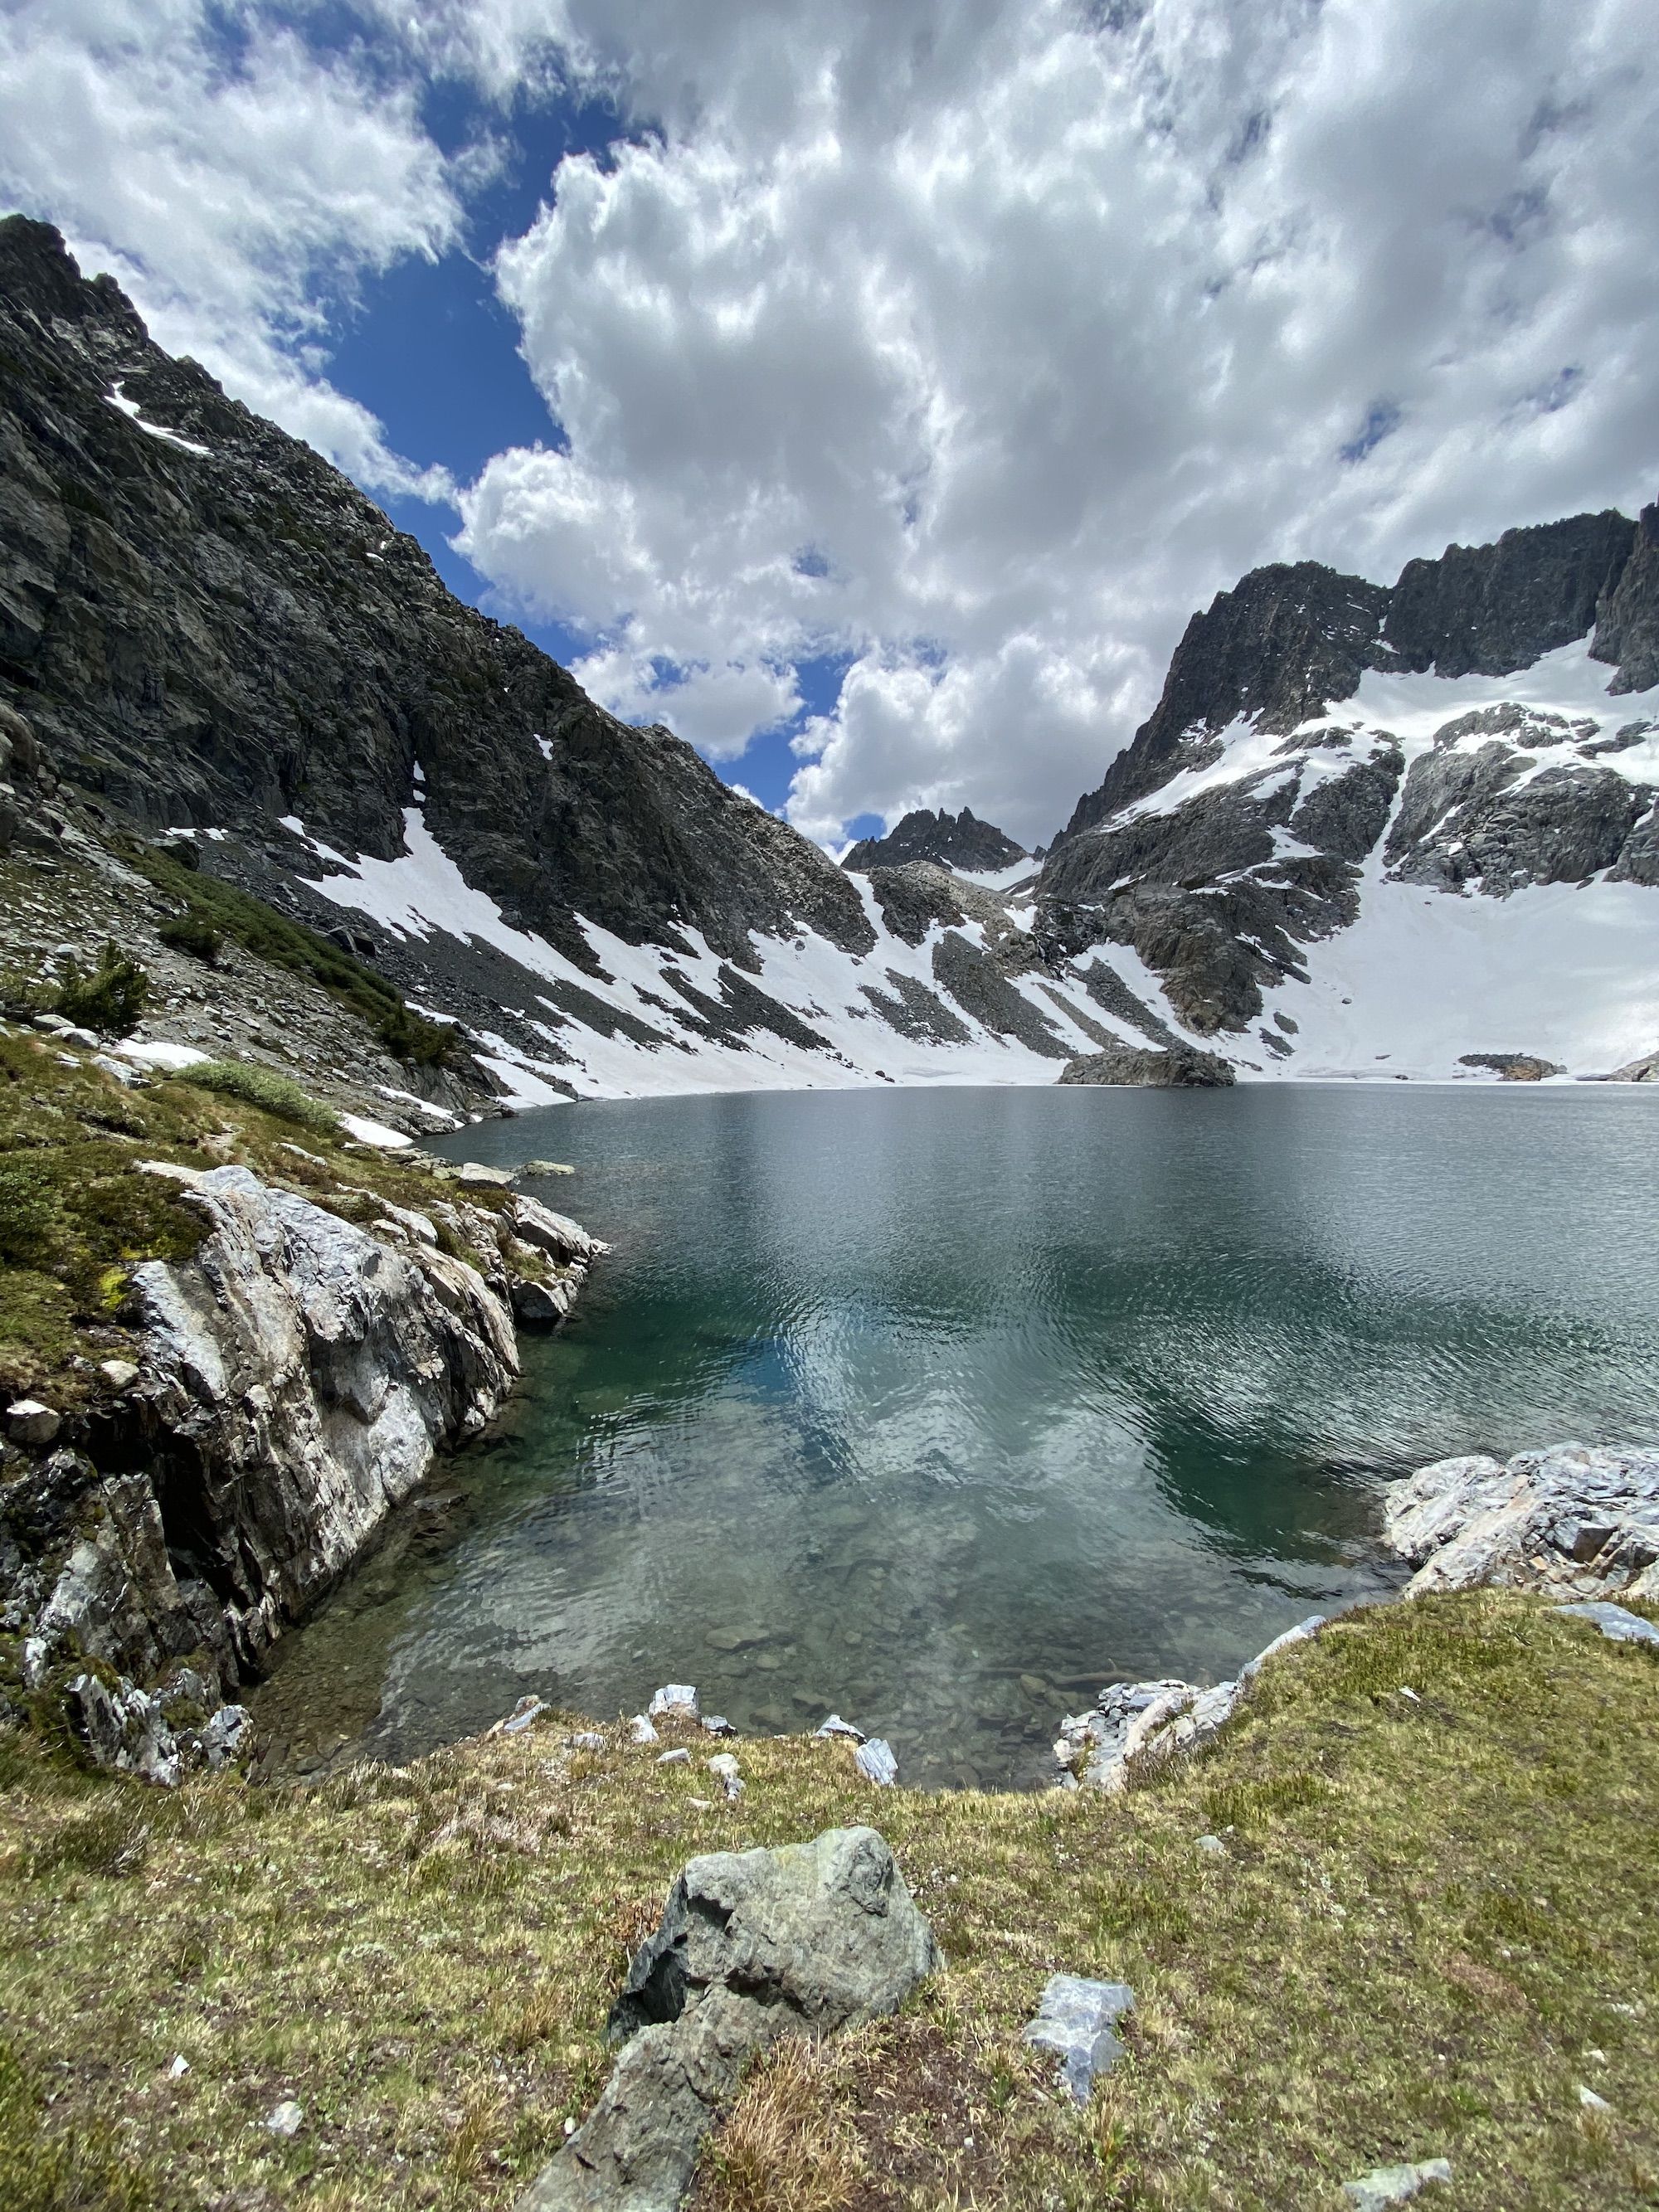 A lake surrounded by high mountains and snow 